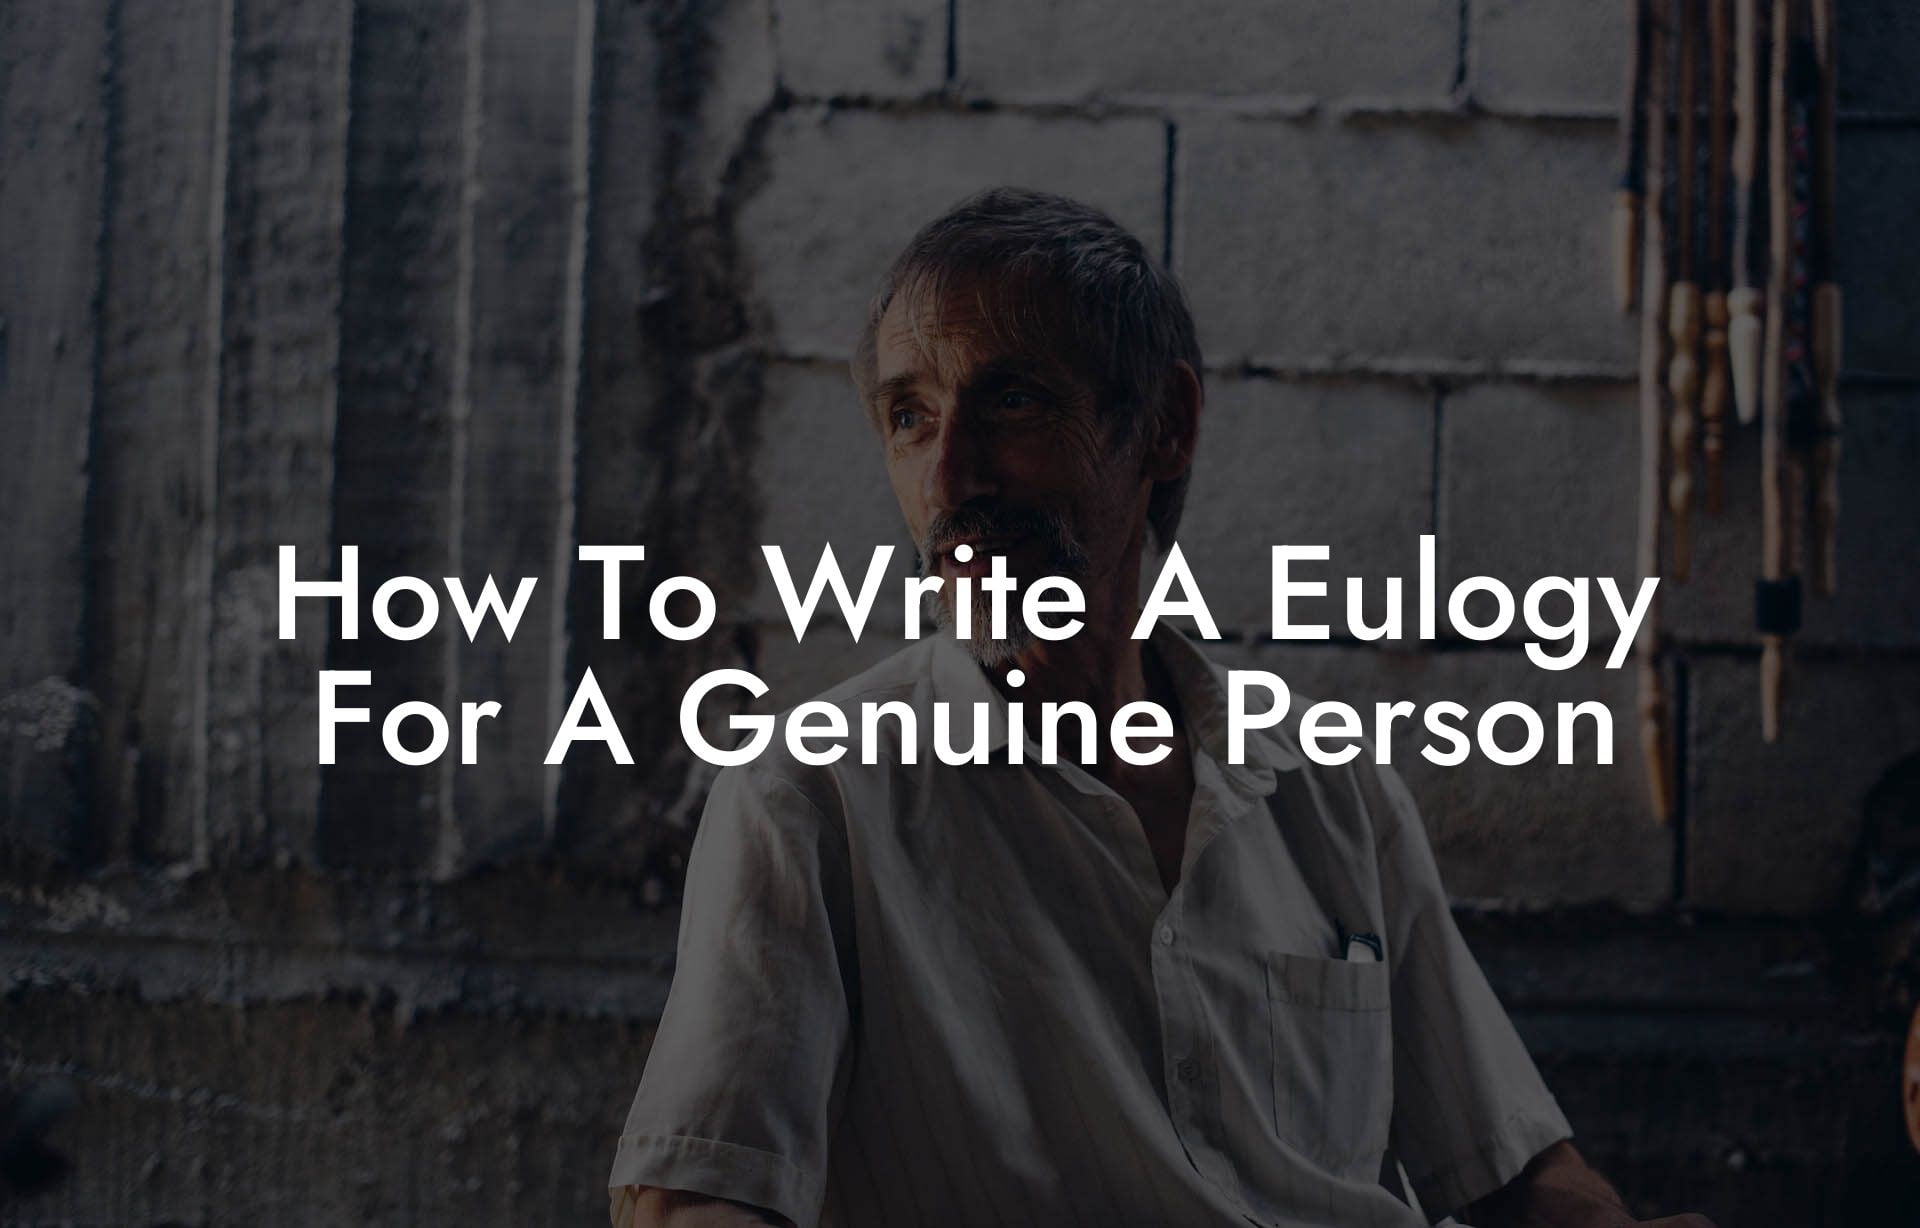 How To Write A Eulogy For A Genuine Person